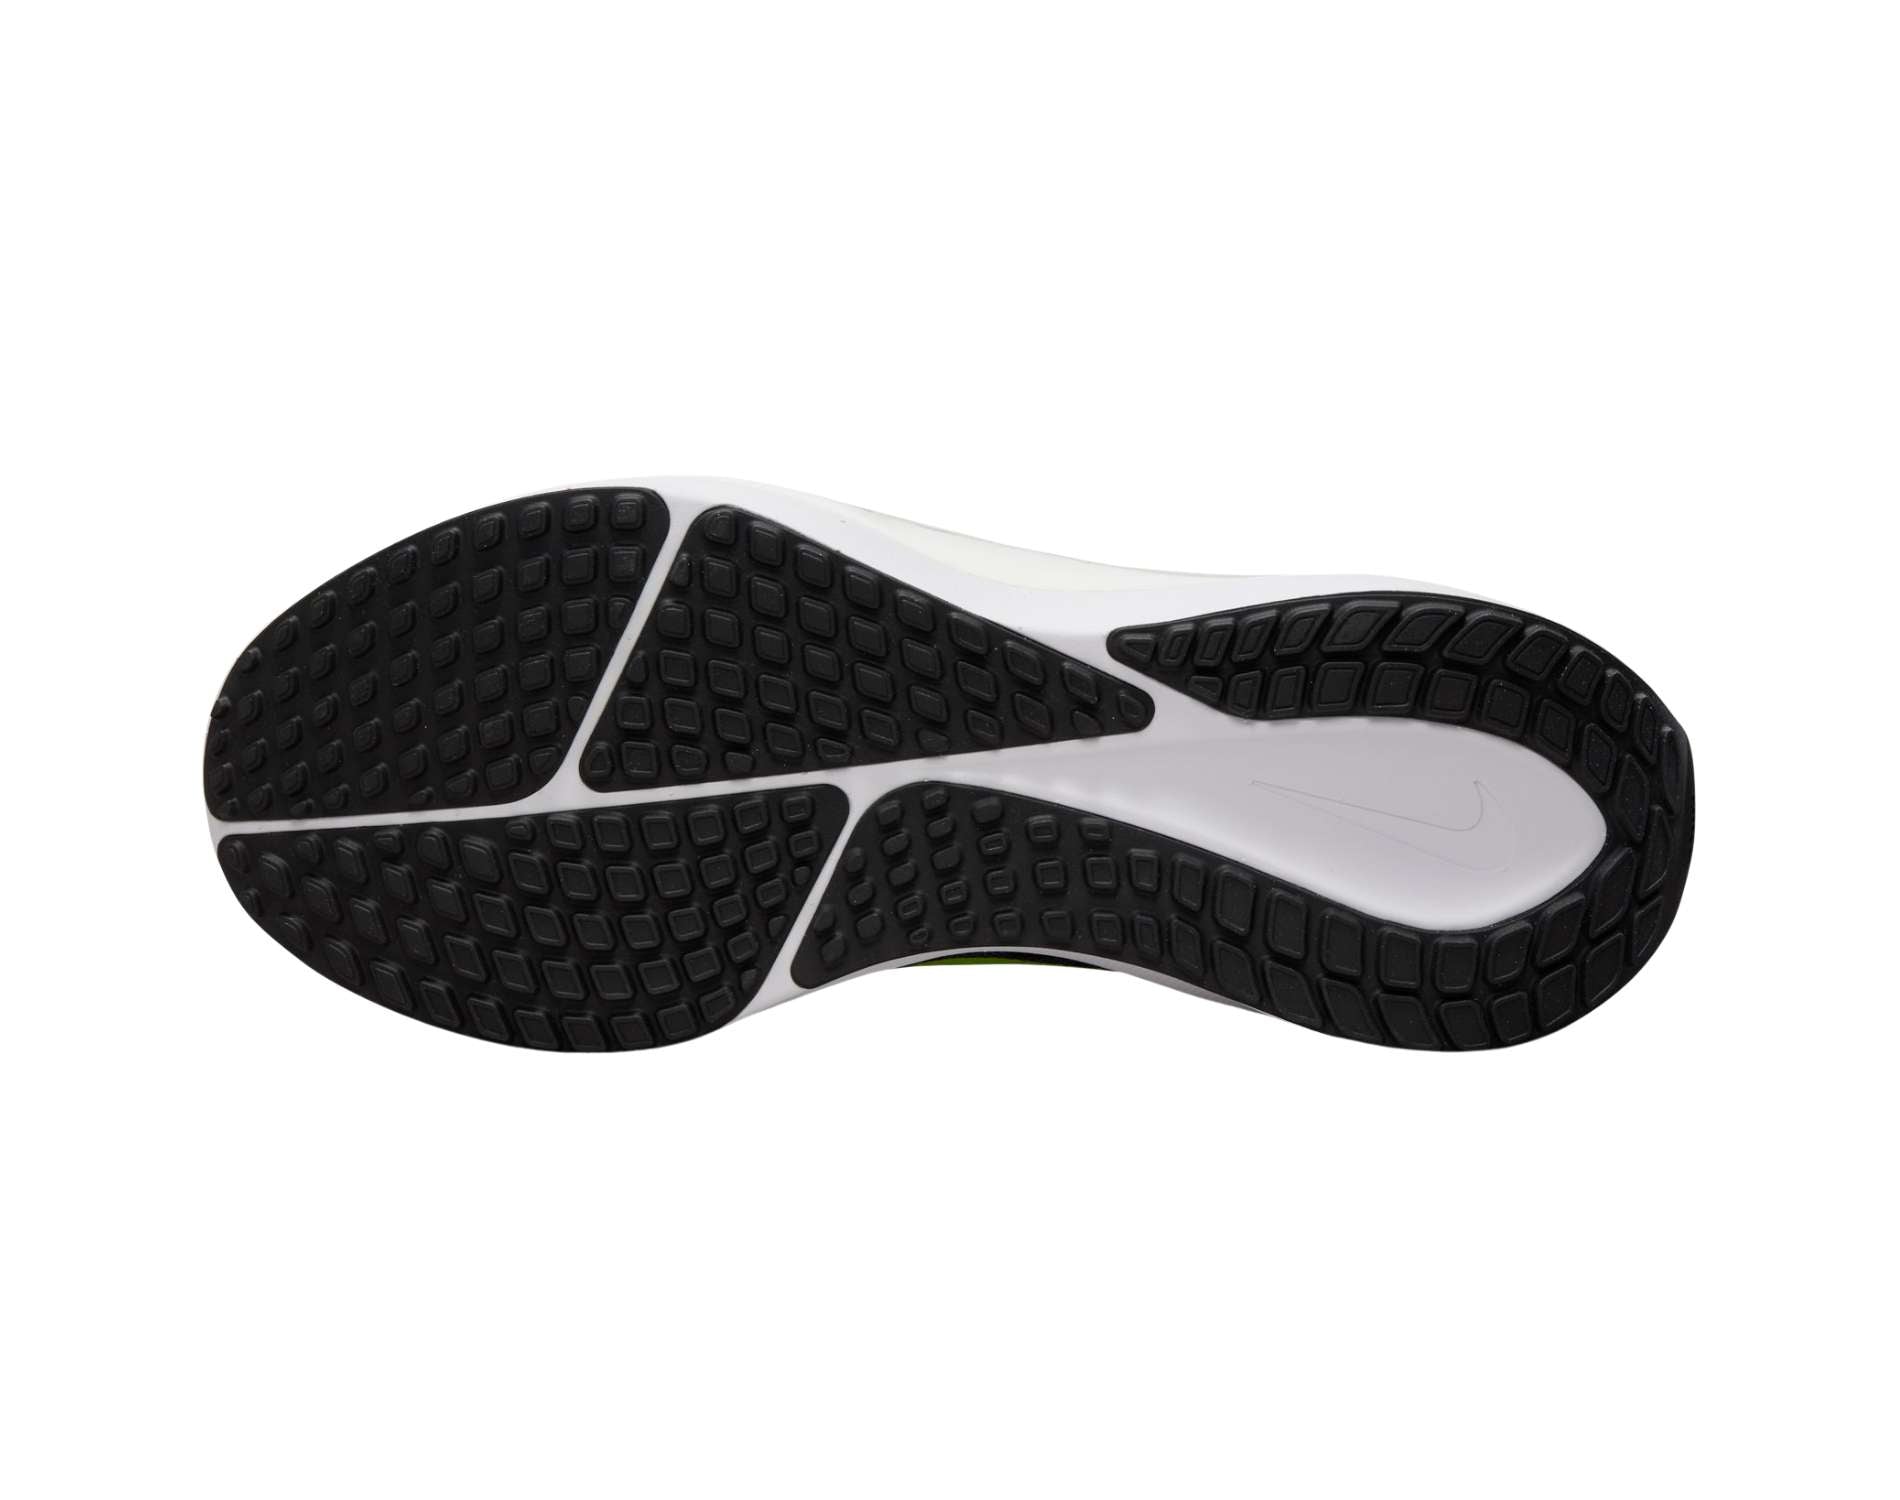 Nike Air Zoom Vomero 17 mens cushioned running shoe in standard d width in black volt lt smoke grey white colour